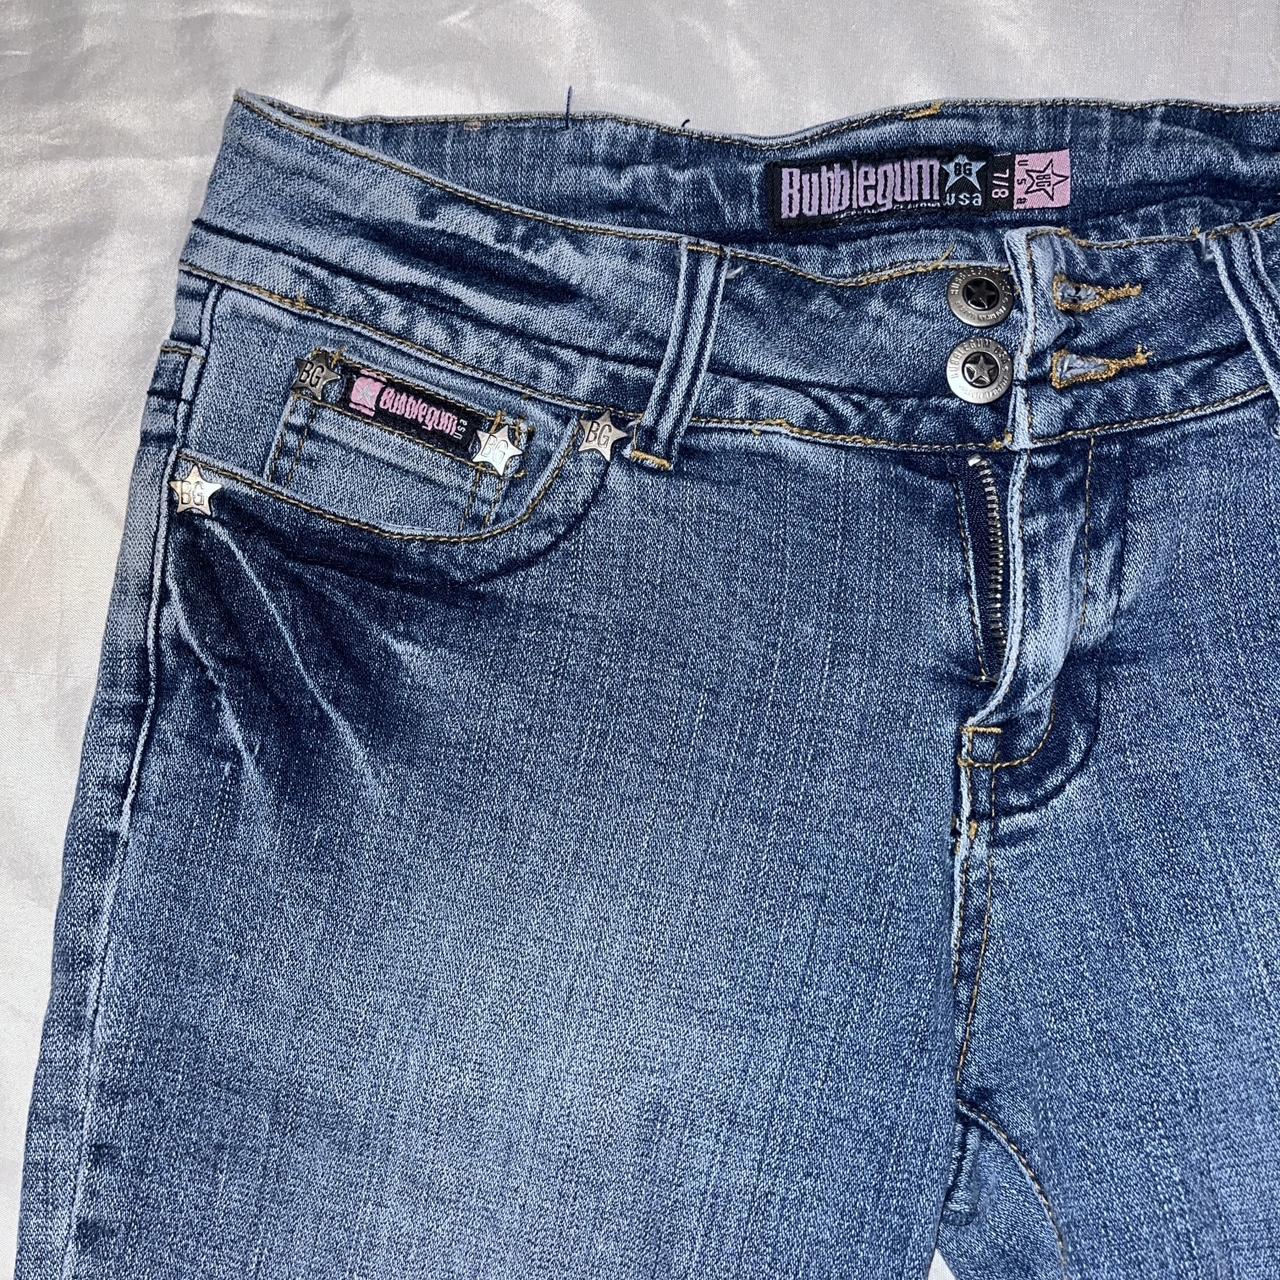 15+ Best Stores Like H&M for Chic Budget-Friendly Fashion | Denim  outfit for women, Budget friendly fashion, Perfect denim